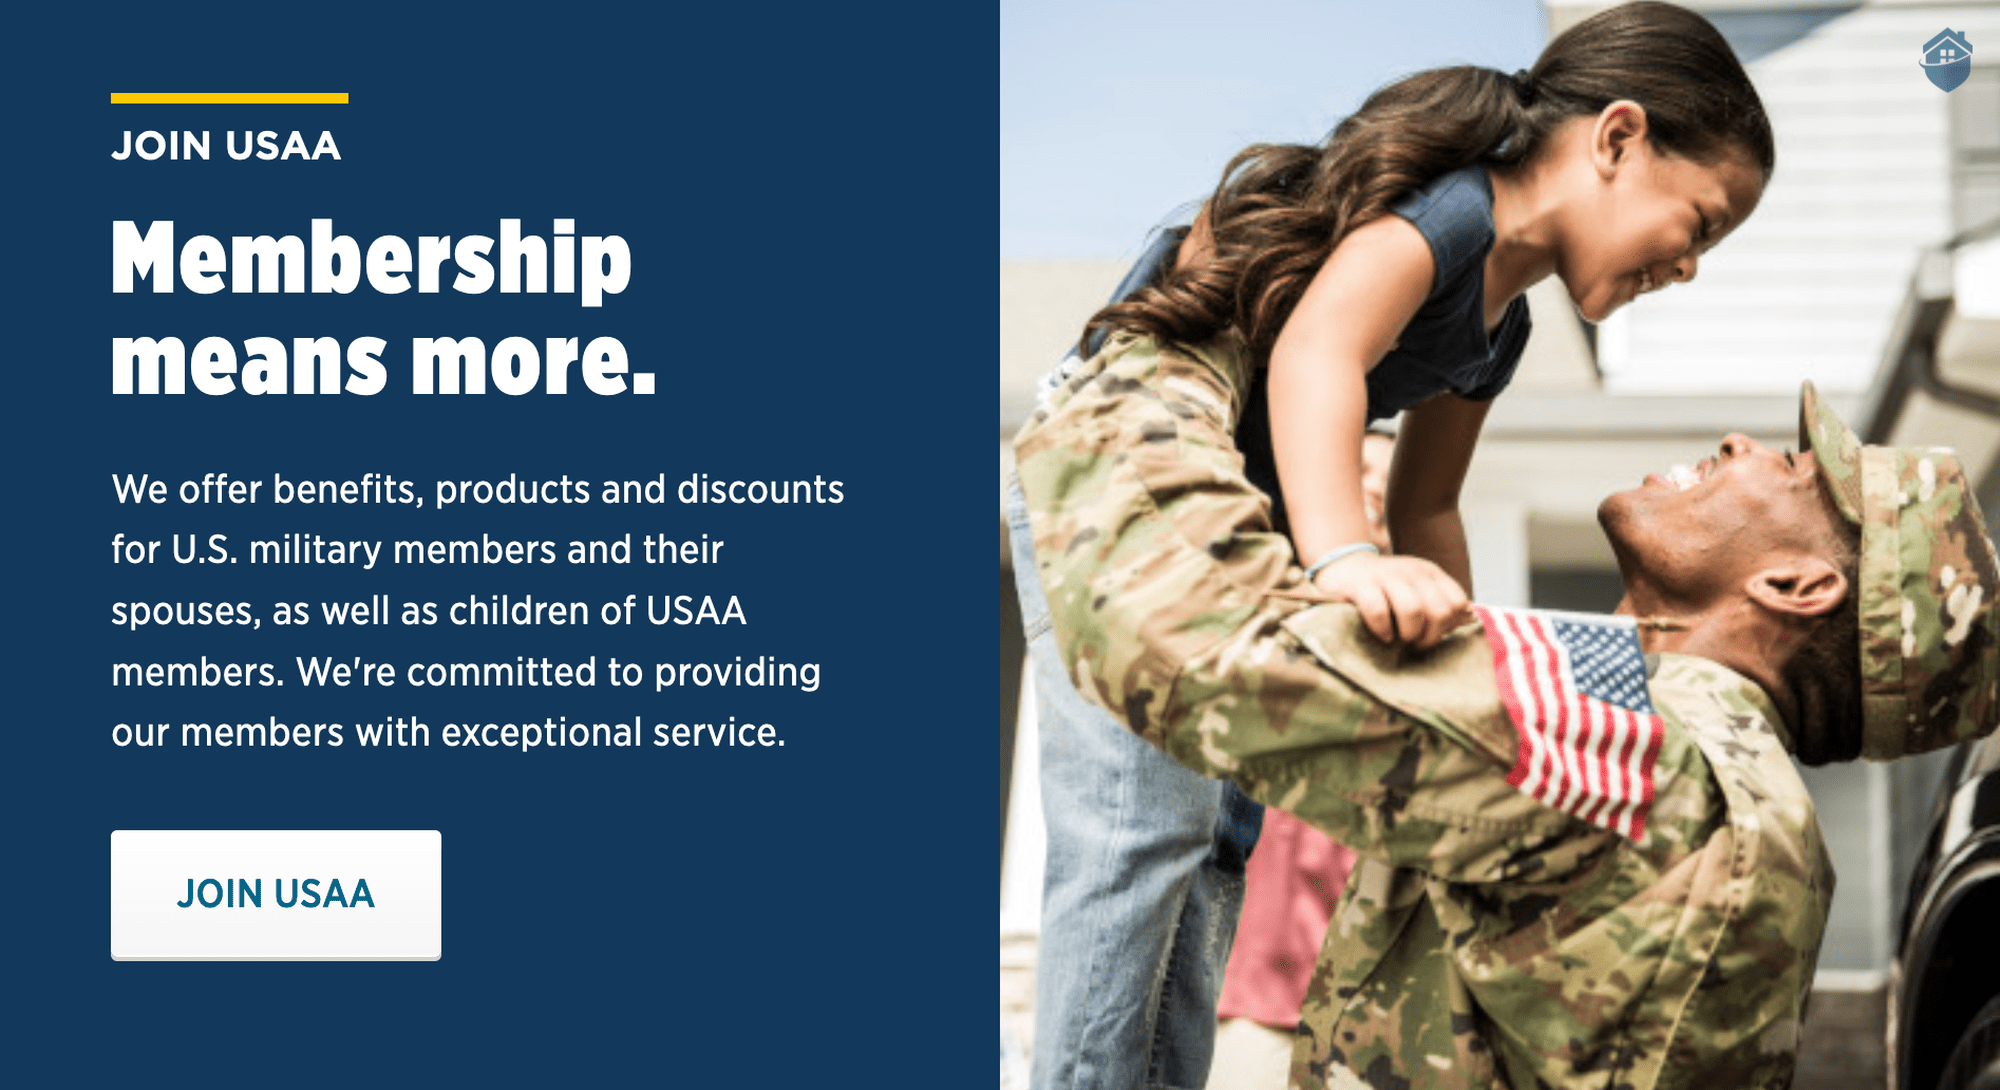 USAA membership is available to military service members and their families